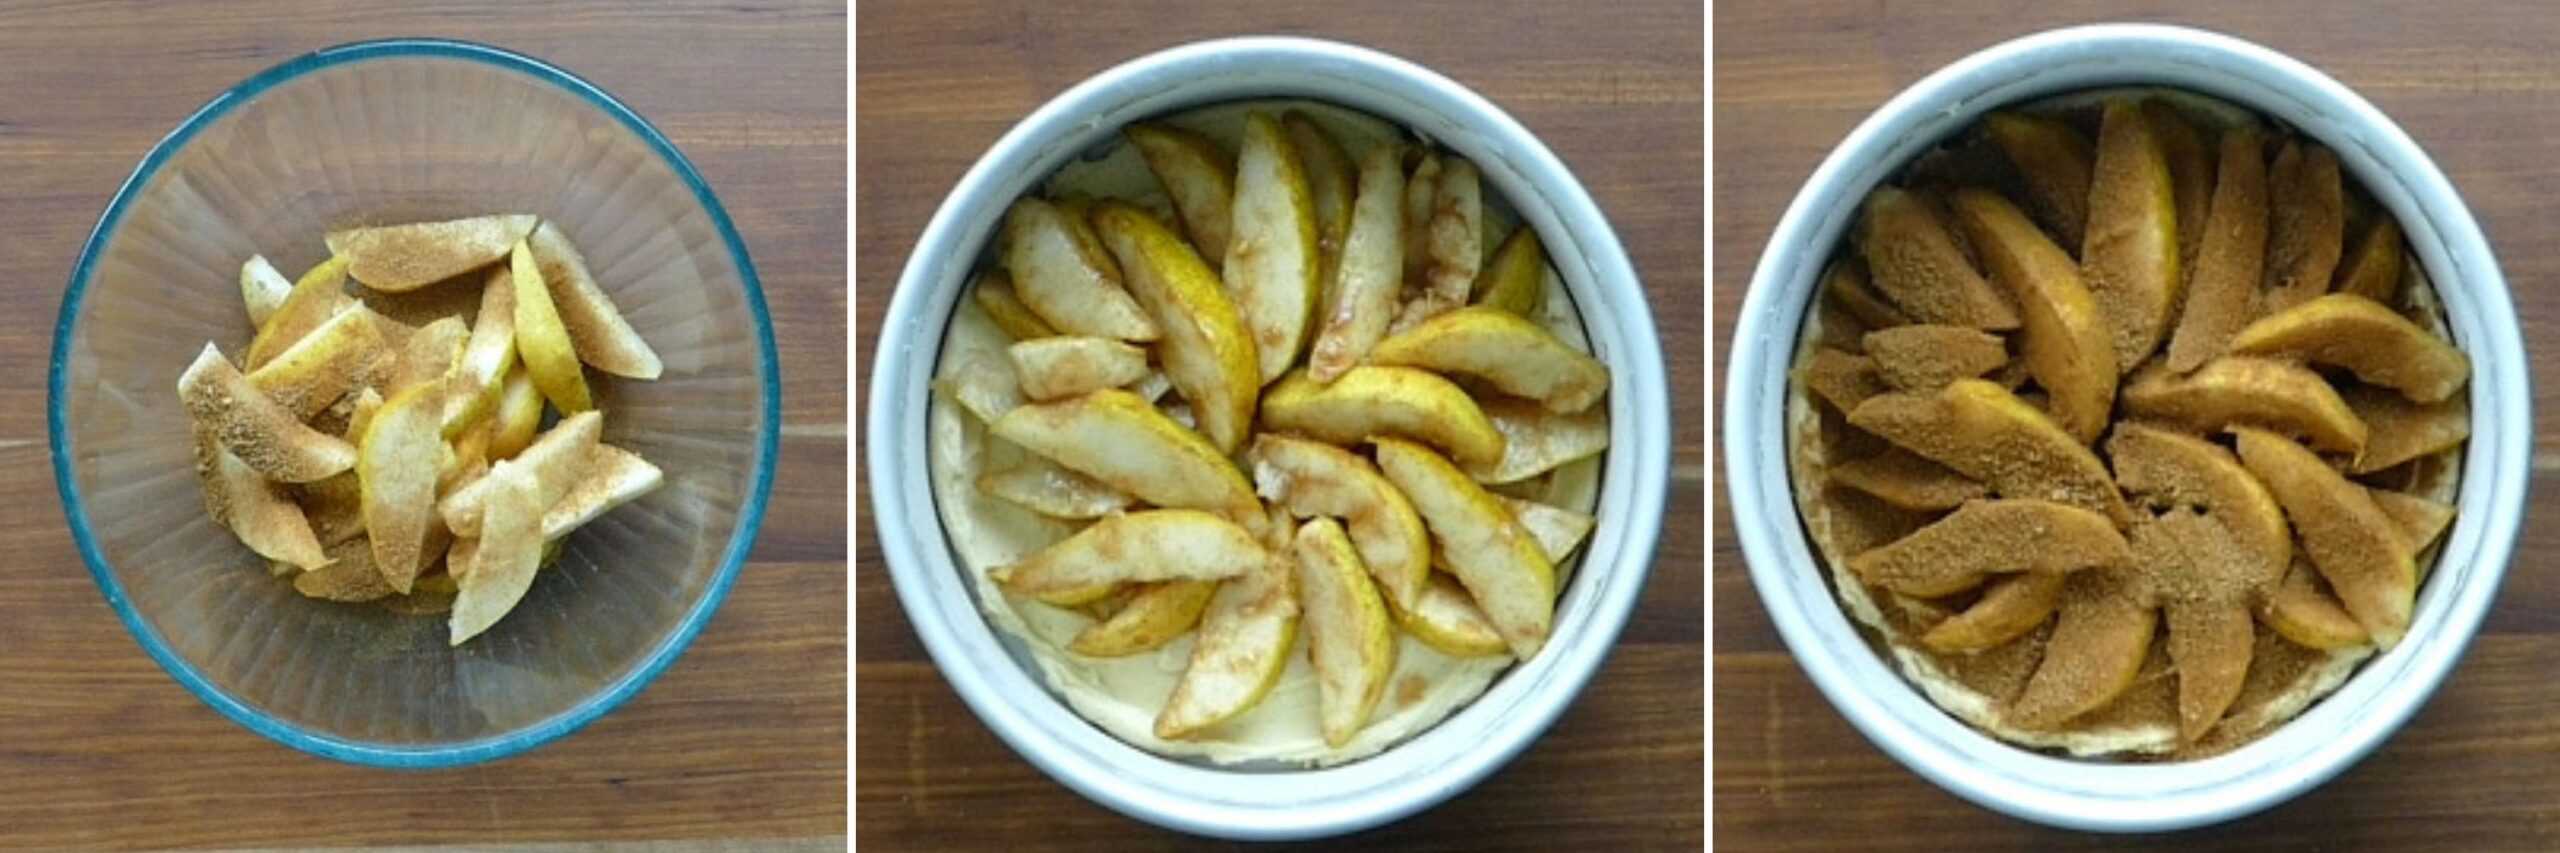 air fryer pear tart collage - pear slices with spices, pears arranged in pan, spices on pears